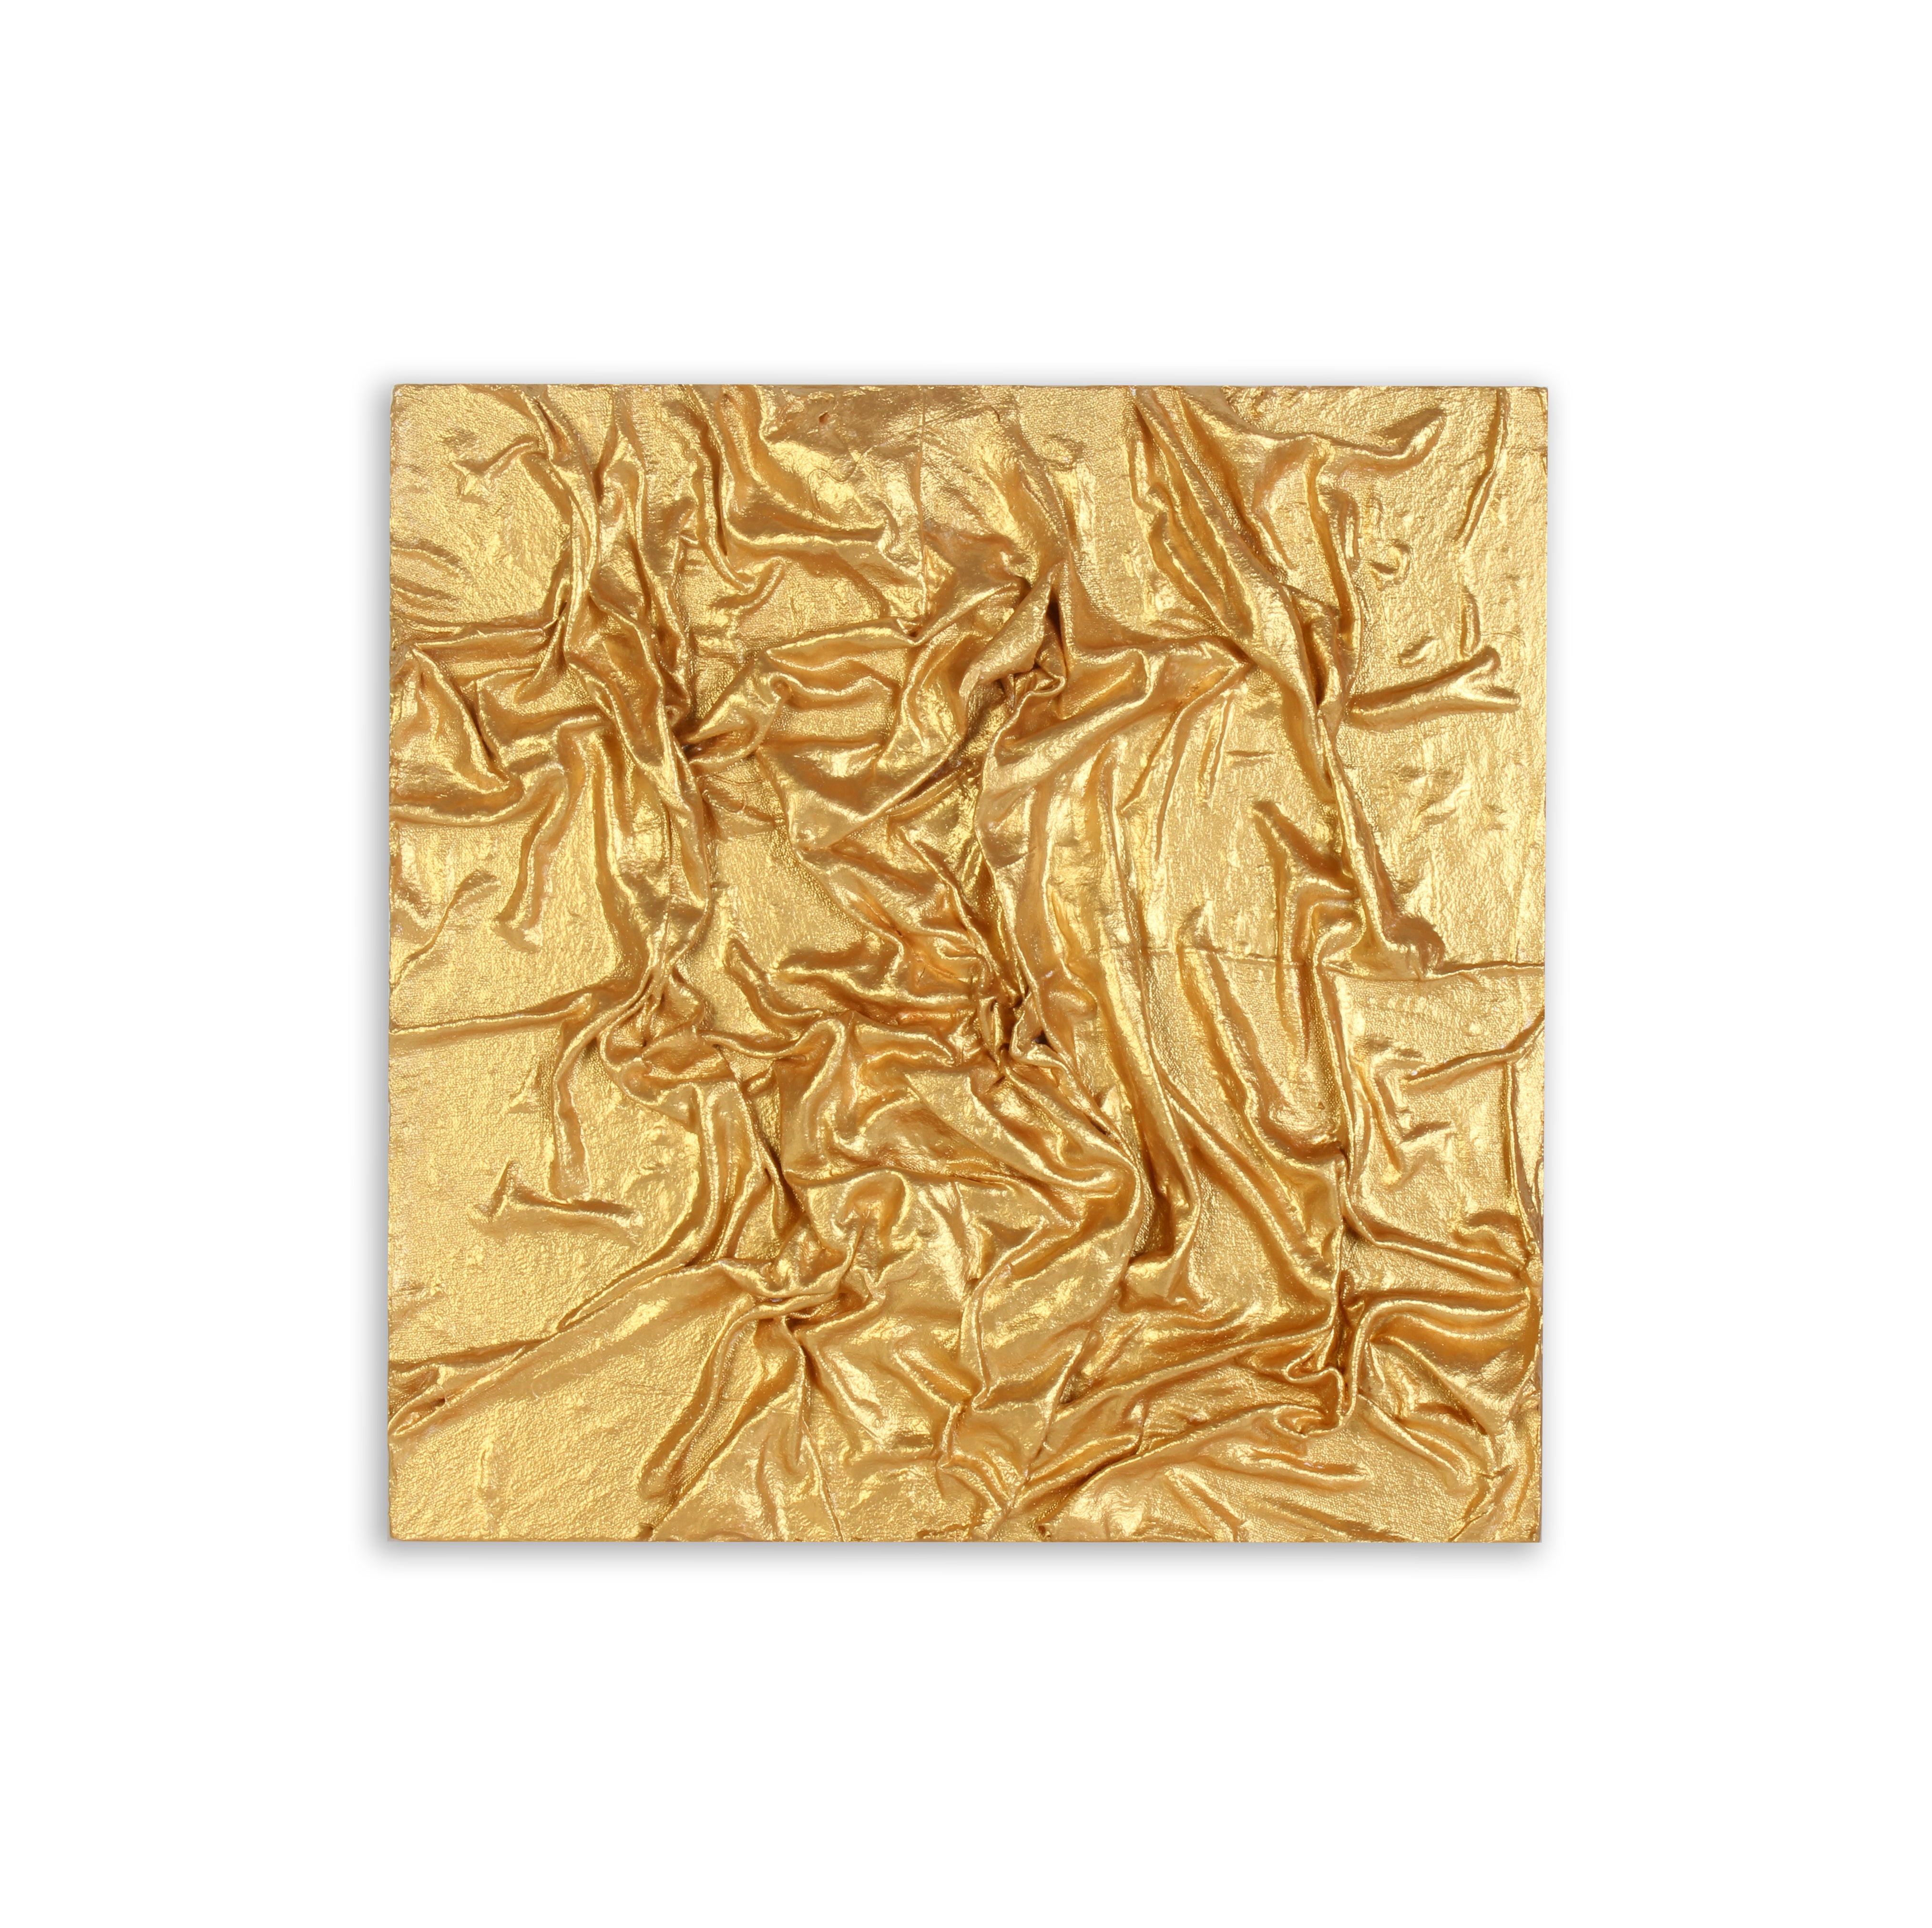 Wall Decor Faux Leather Art Gold Sheen Approx H12 X L12 X D0.78inch 1pc